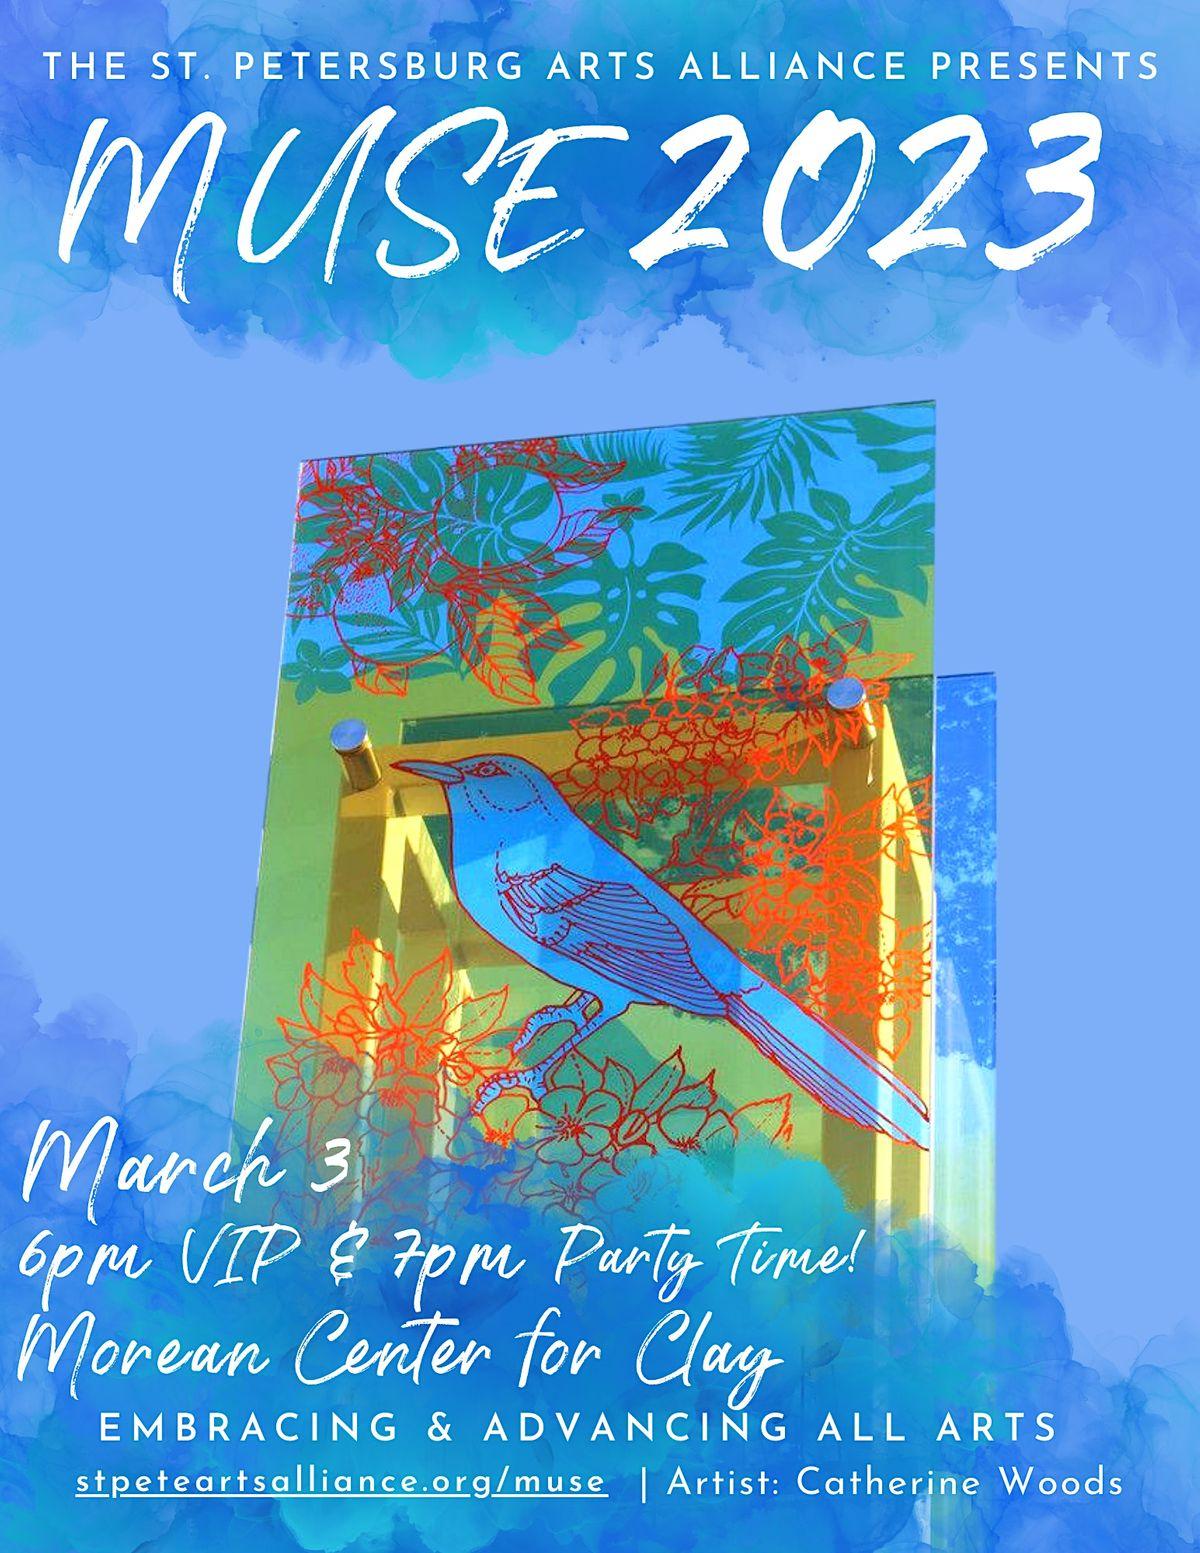 MUSE 2023, Presented by the St. Petersburg Arts Alliance